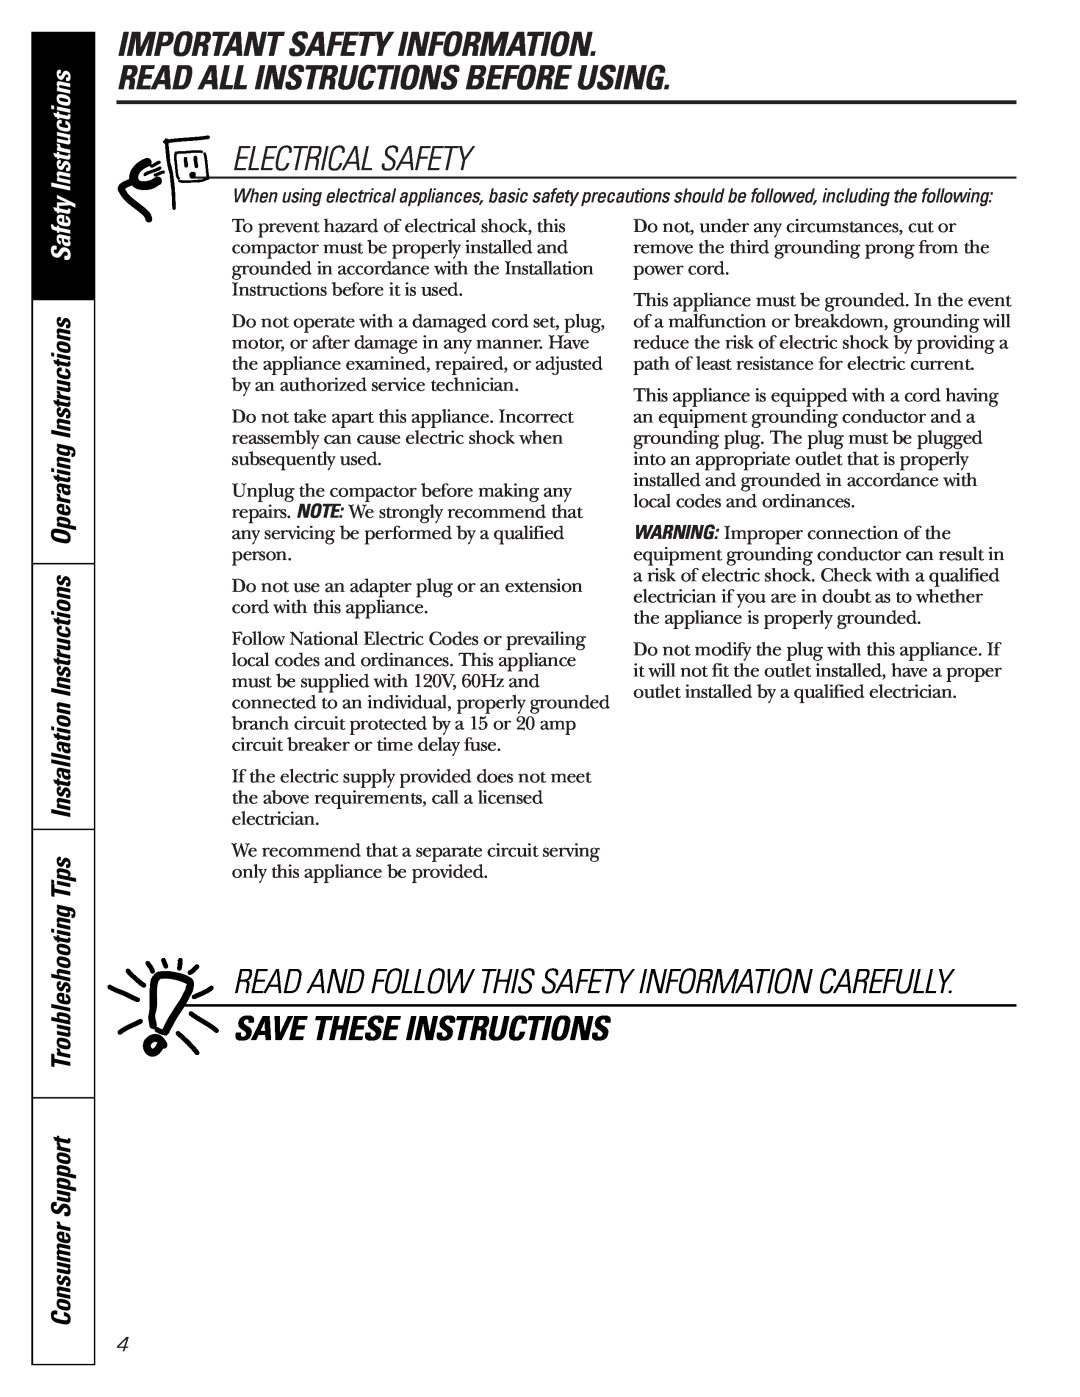 GE GCG1520 Electrical Safety, Save These Instructions, Tips Installation Instructions Operating Instructions Safety 